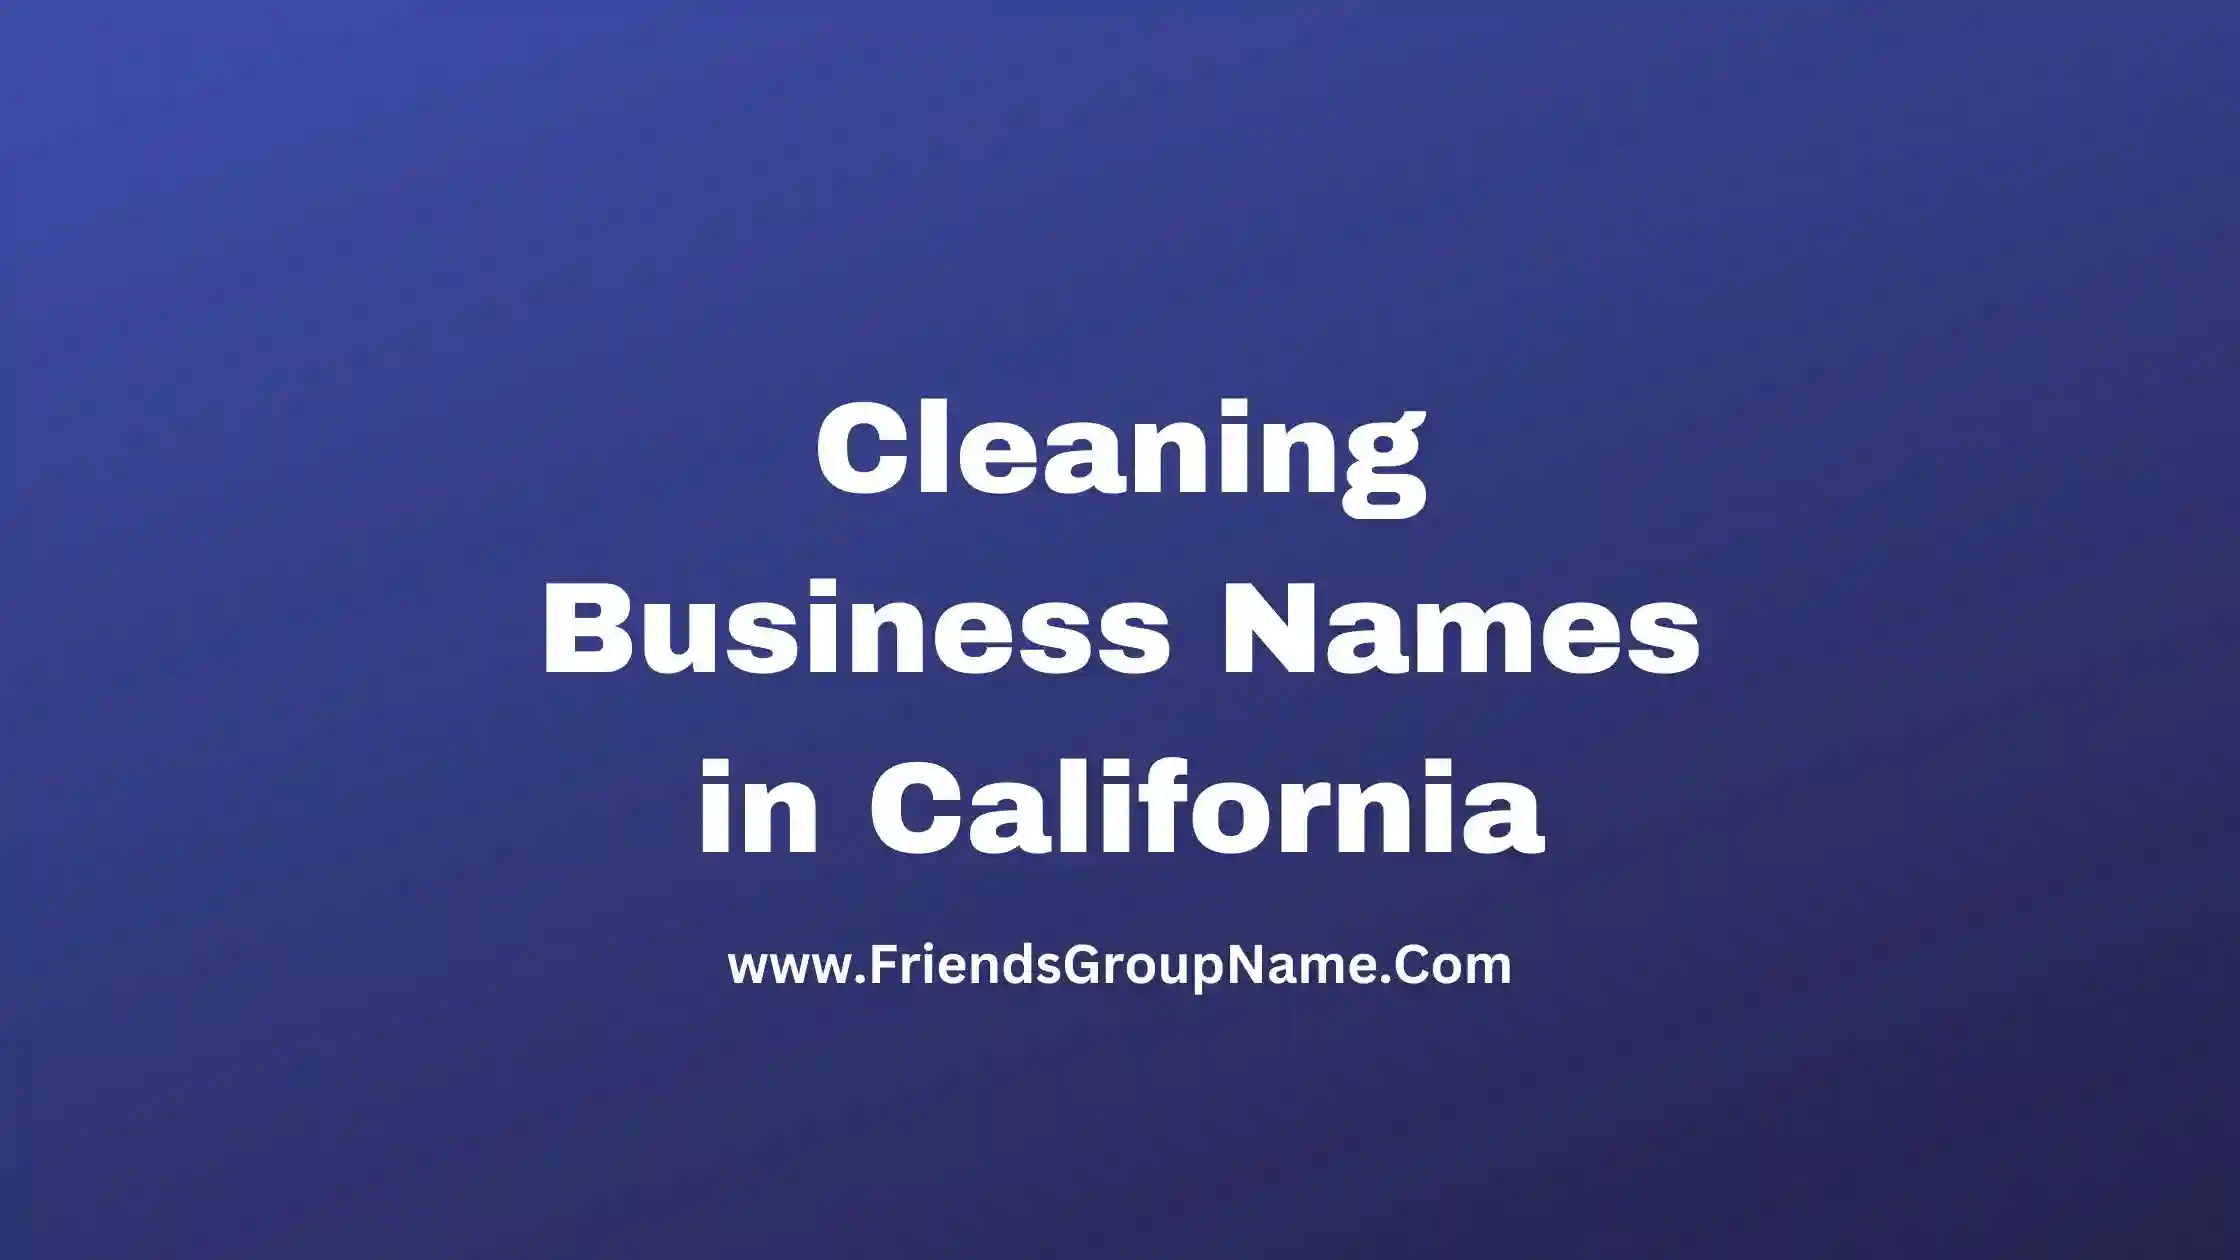 Cleaning Business Names in California